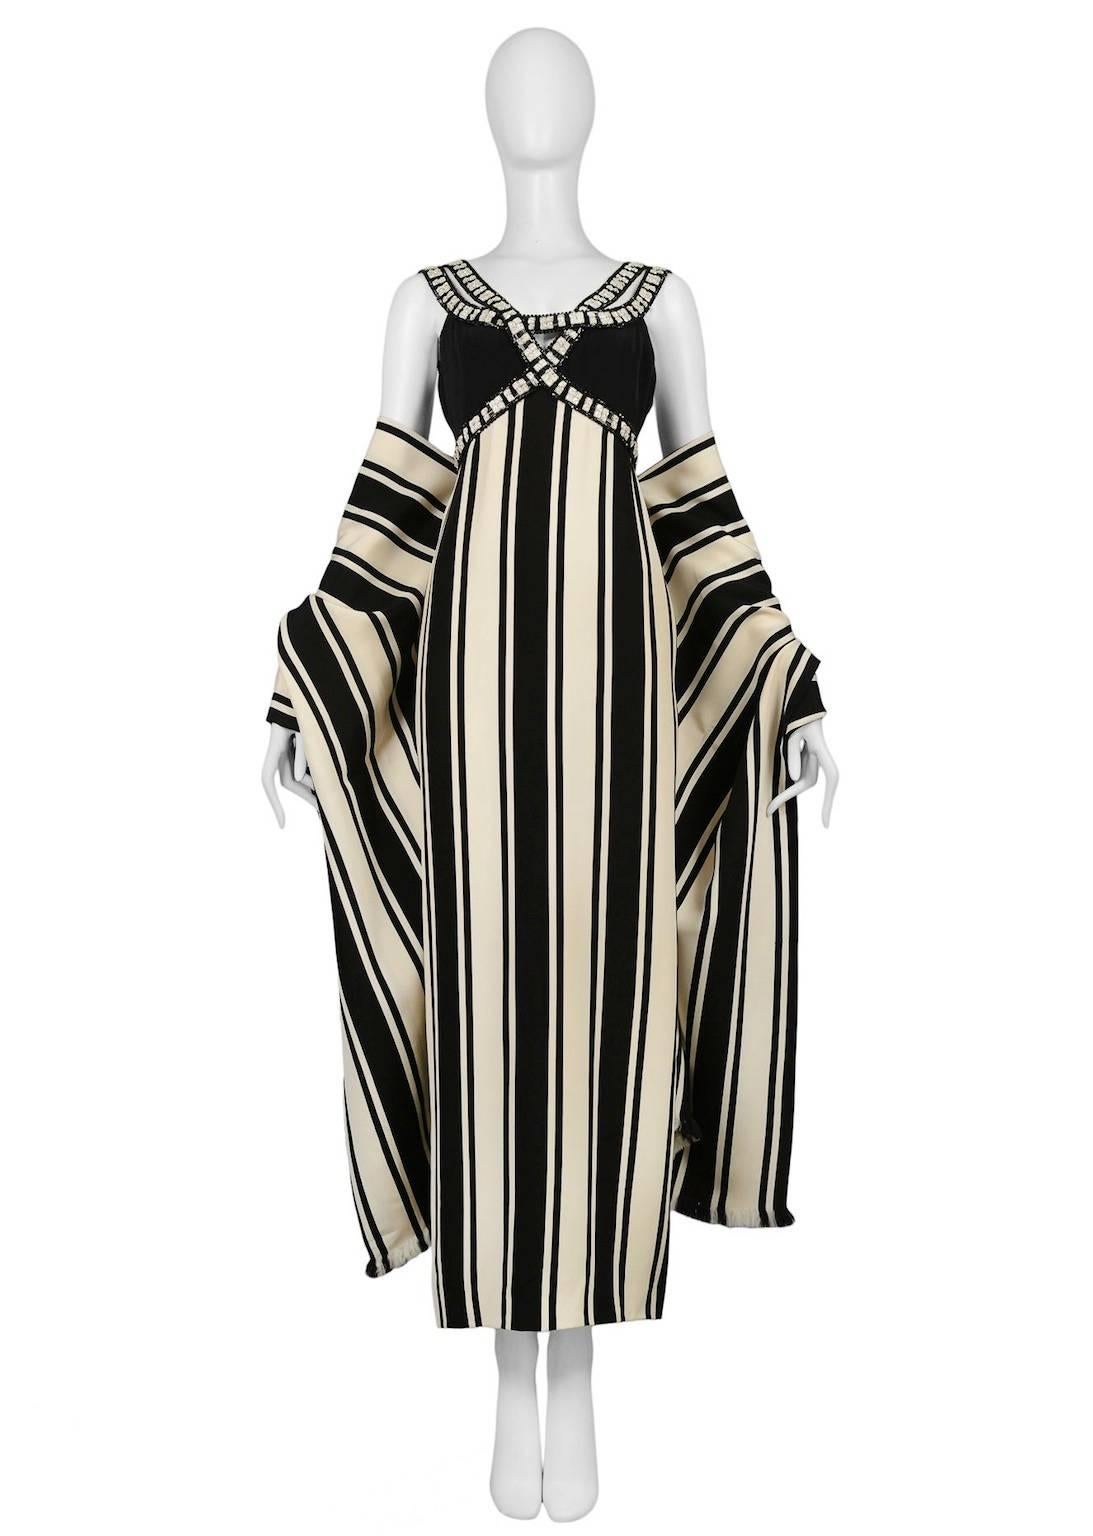 Vintage Galanos black and white silk column gown adorned with jewel and beaded overlapping front detail and double straps. The gown comes with a matching stripe shawl featuring fringed trim.